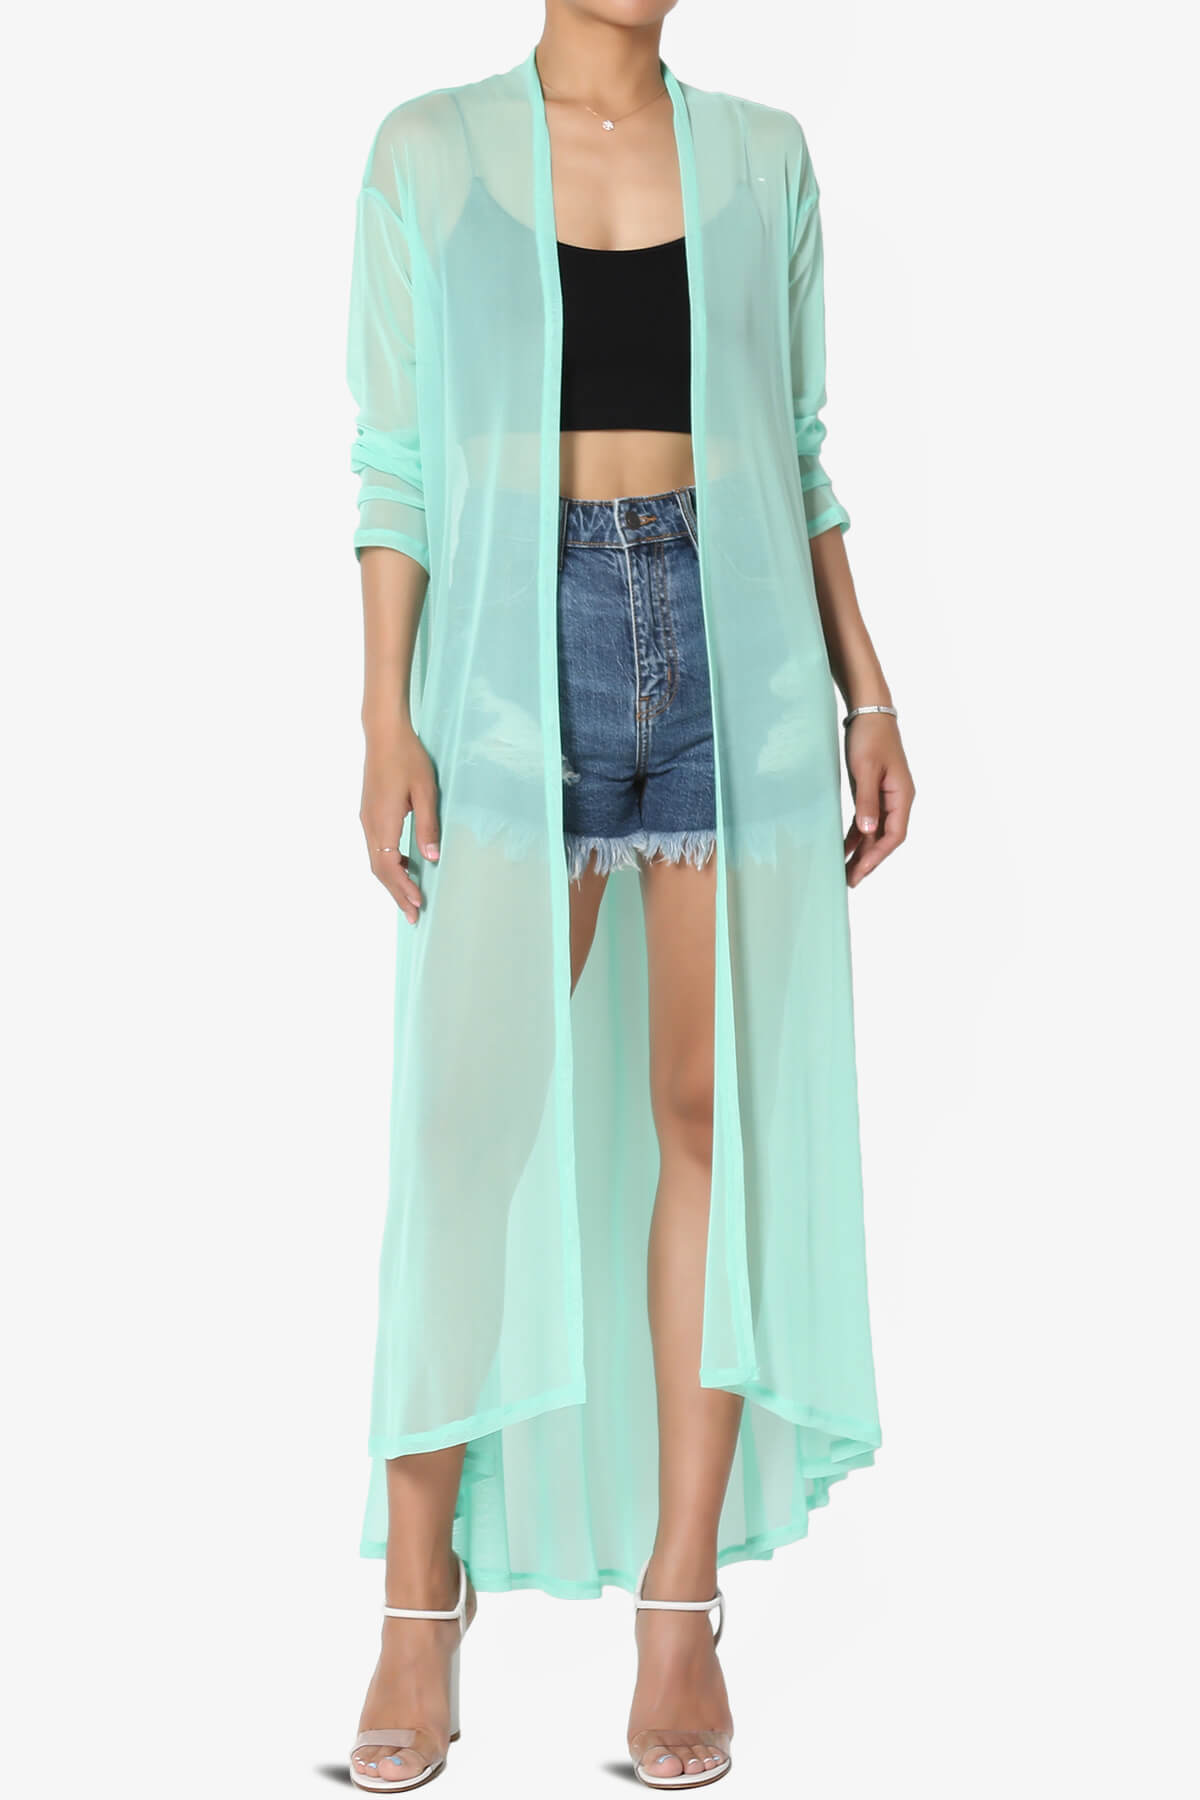 Load image into Gallery viewer, Moxxi Sheer Mesh Open Cardigan Duster GREEN MINT_1
